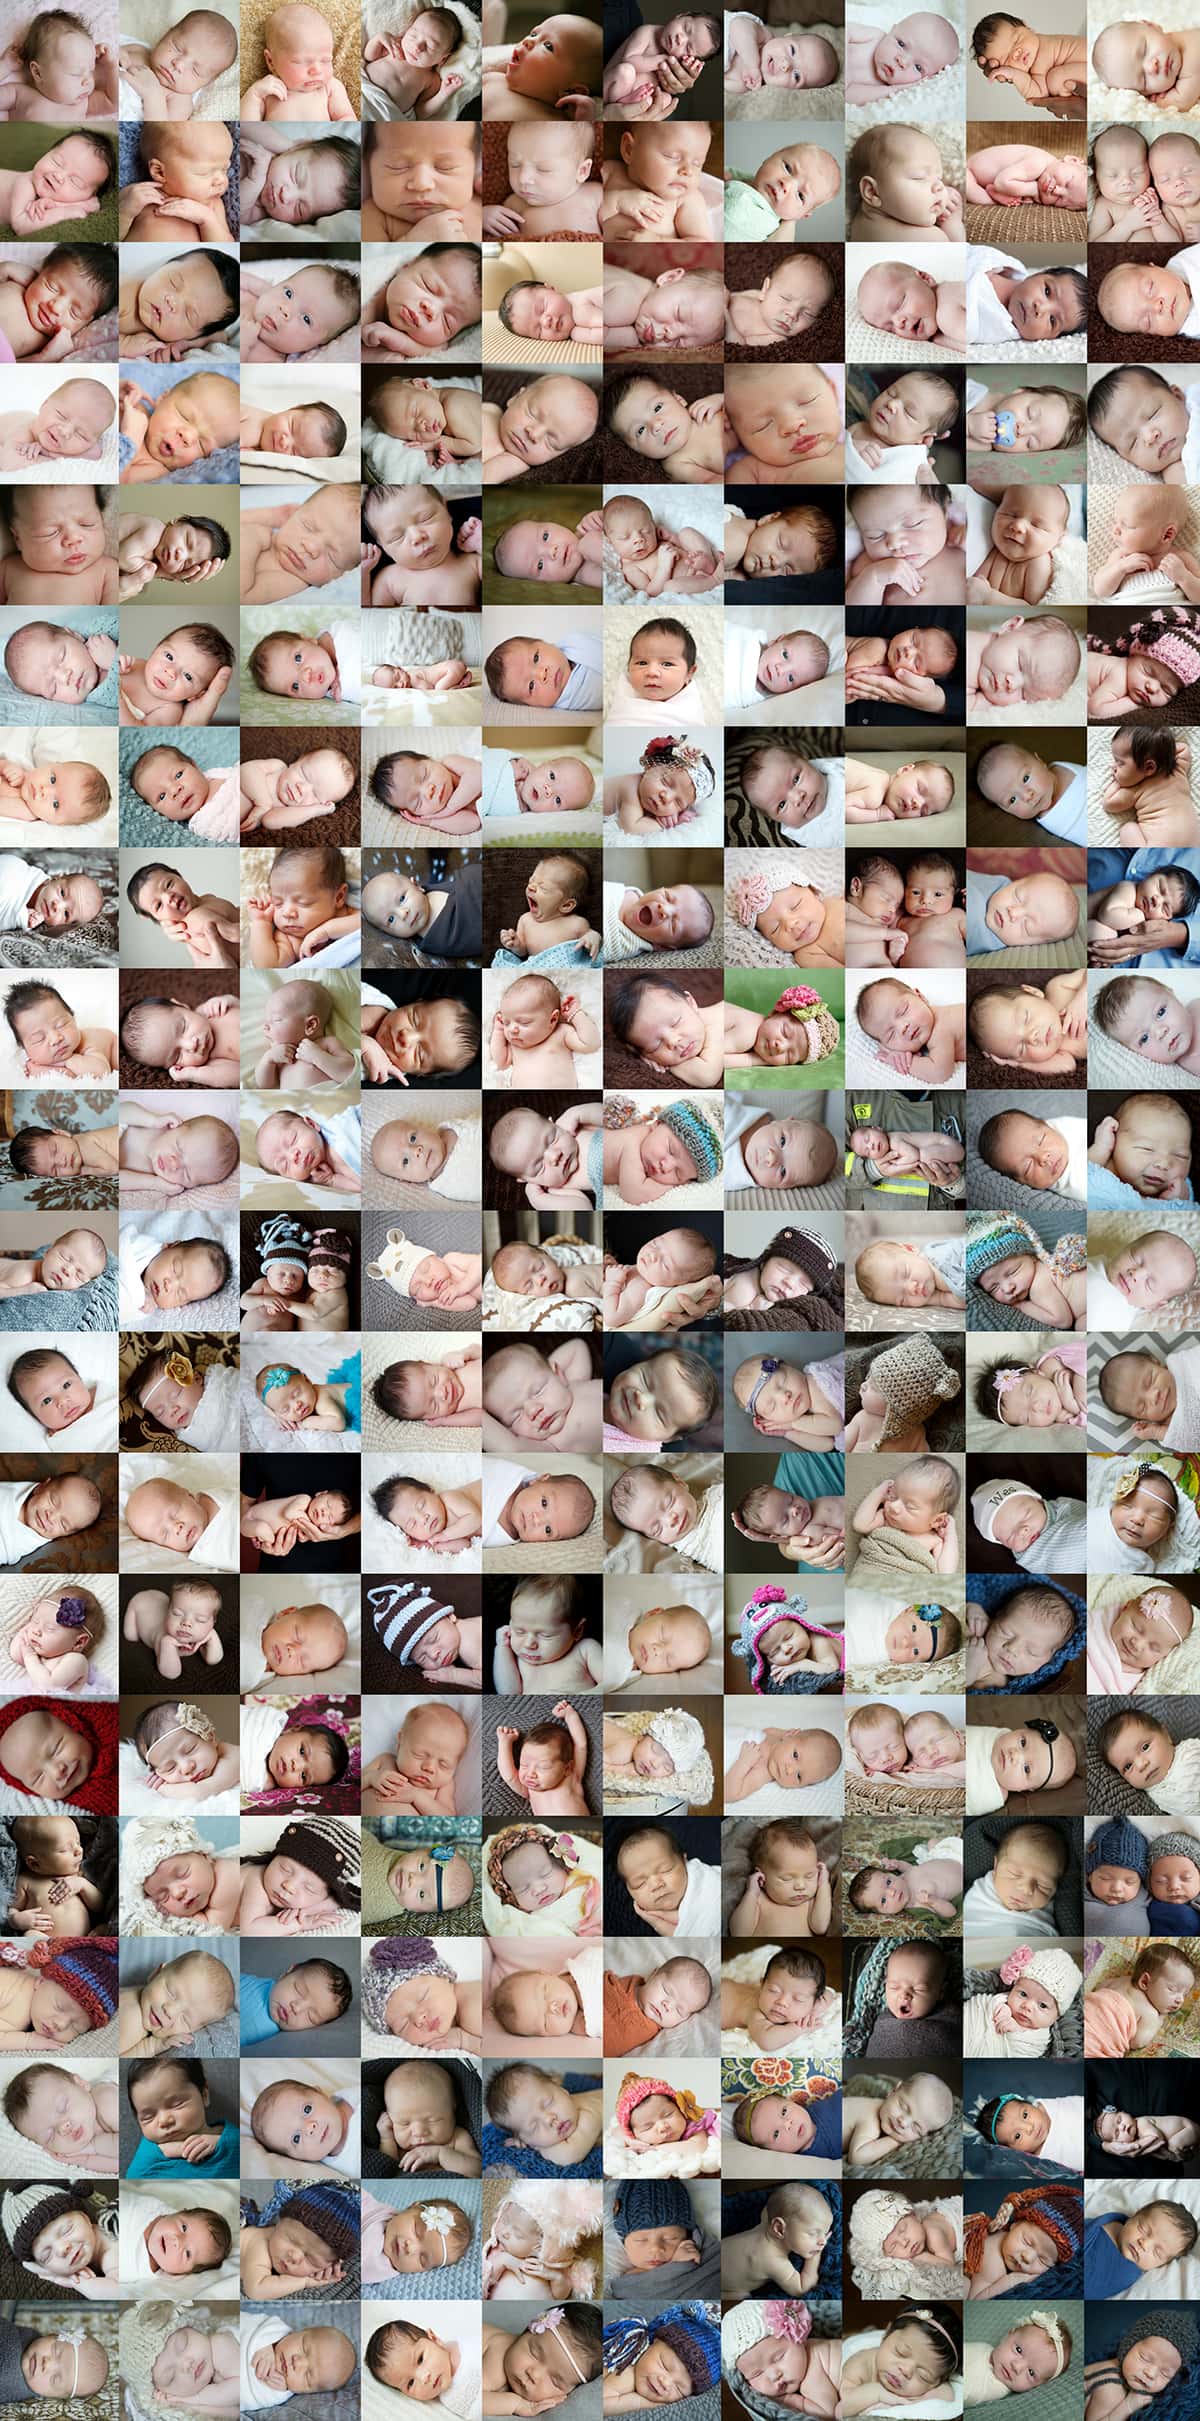 Babies 5-25 days old, from 2005-2015